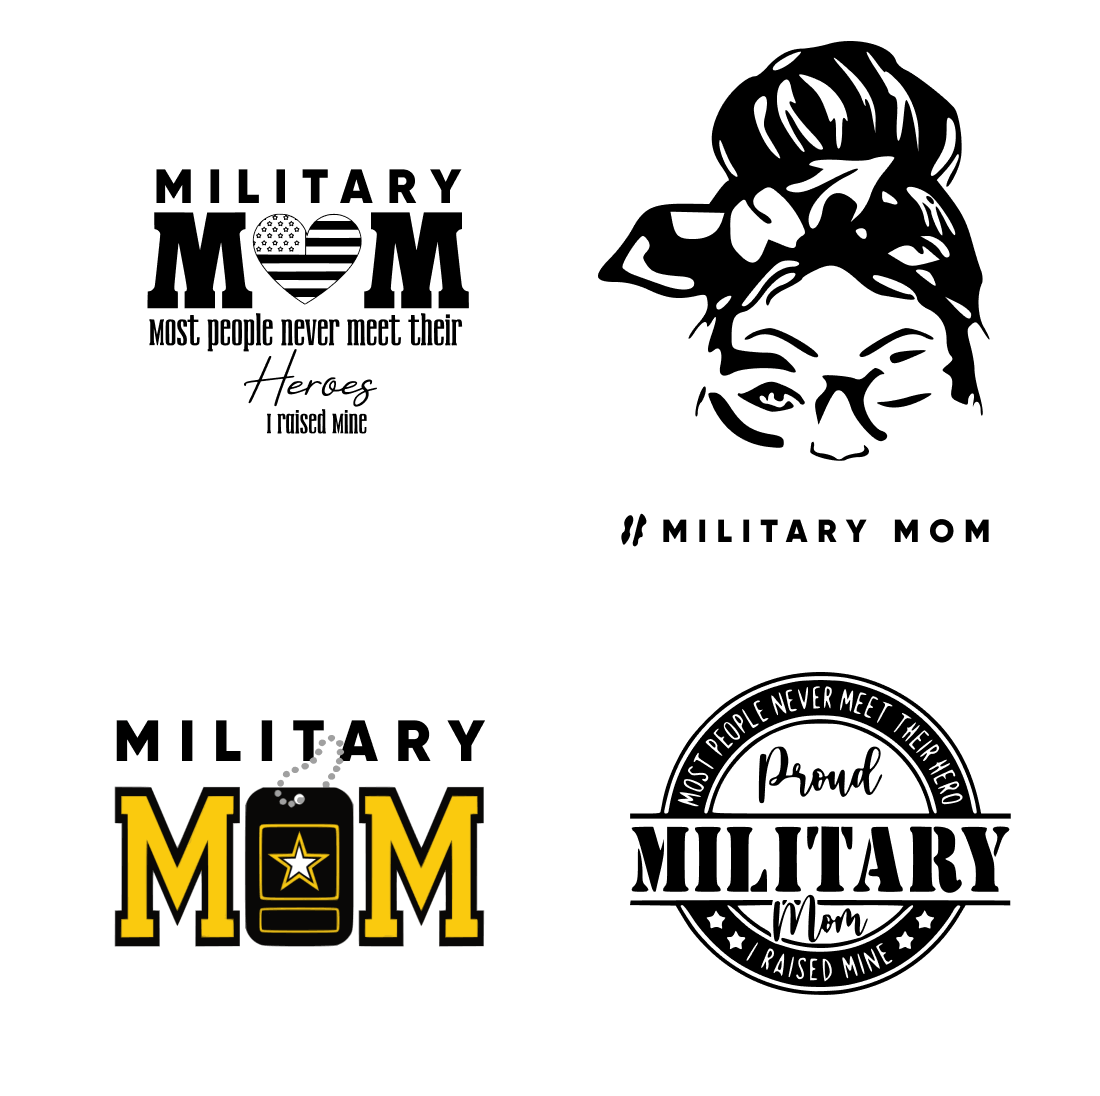 Four black and white and yellow logos for the military mom.